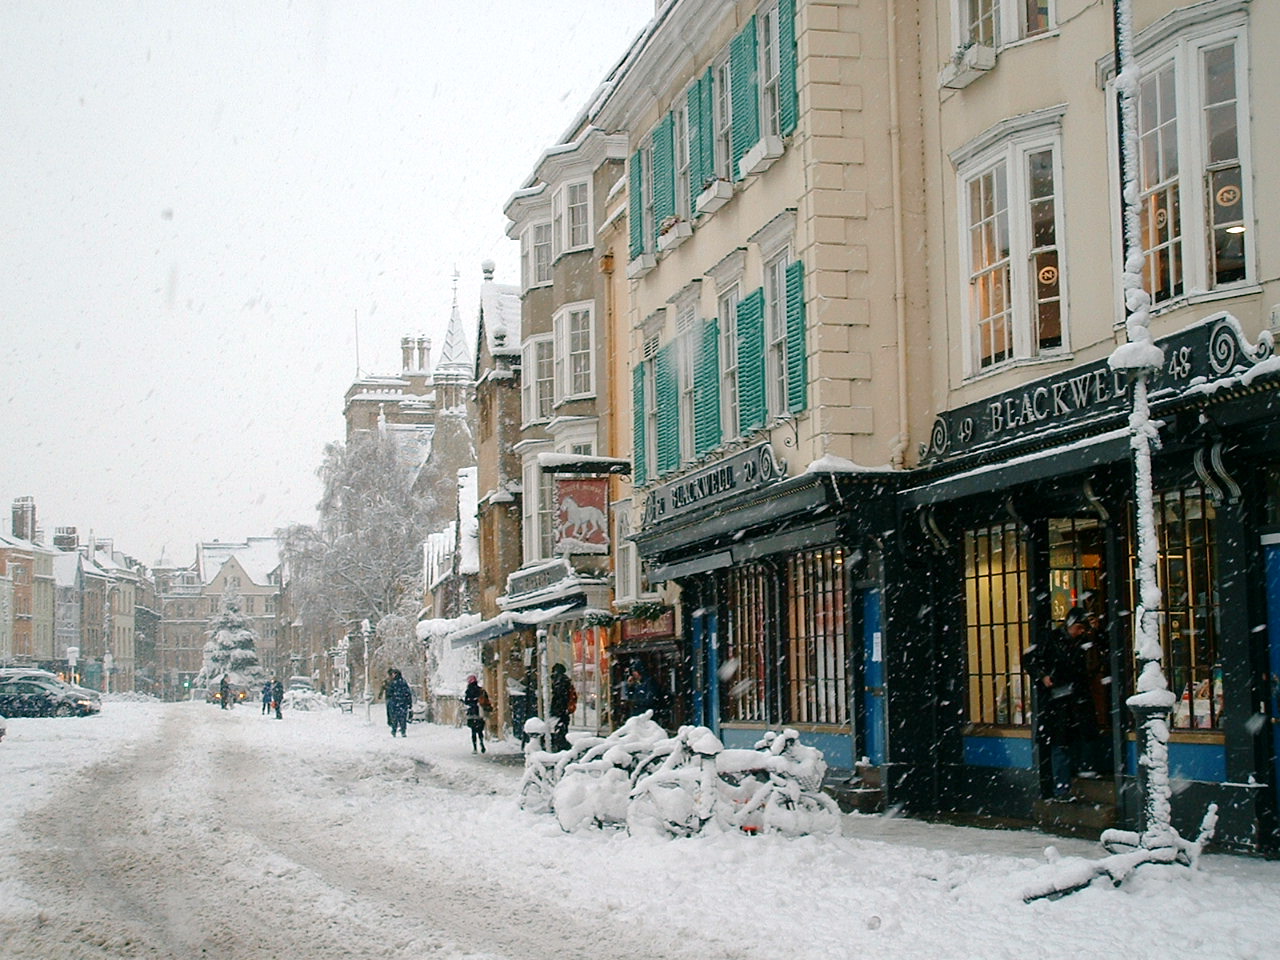 [Broad St, with snow]